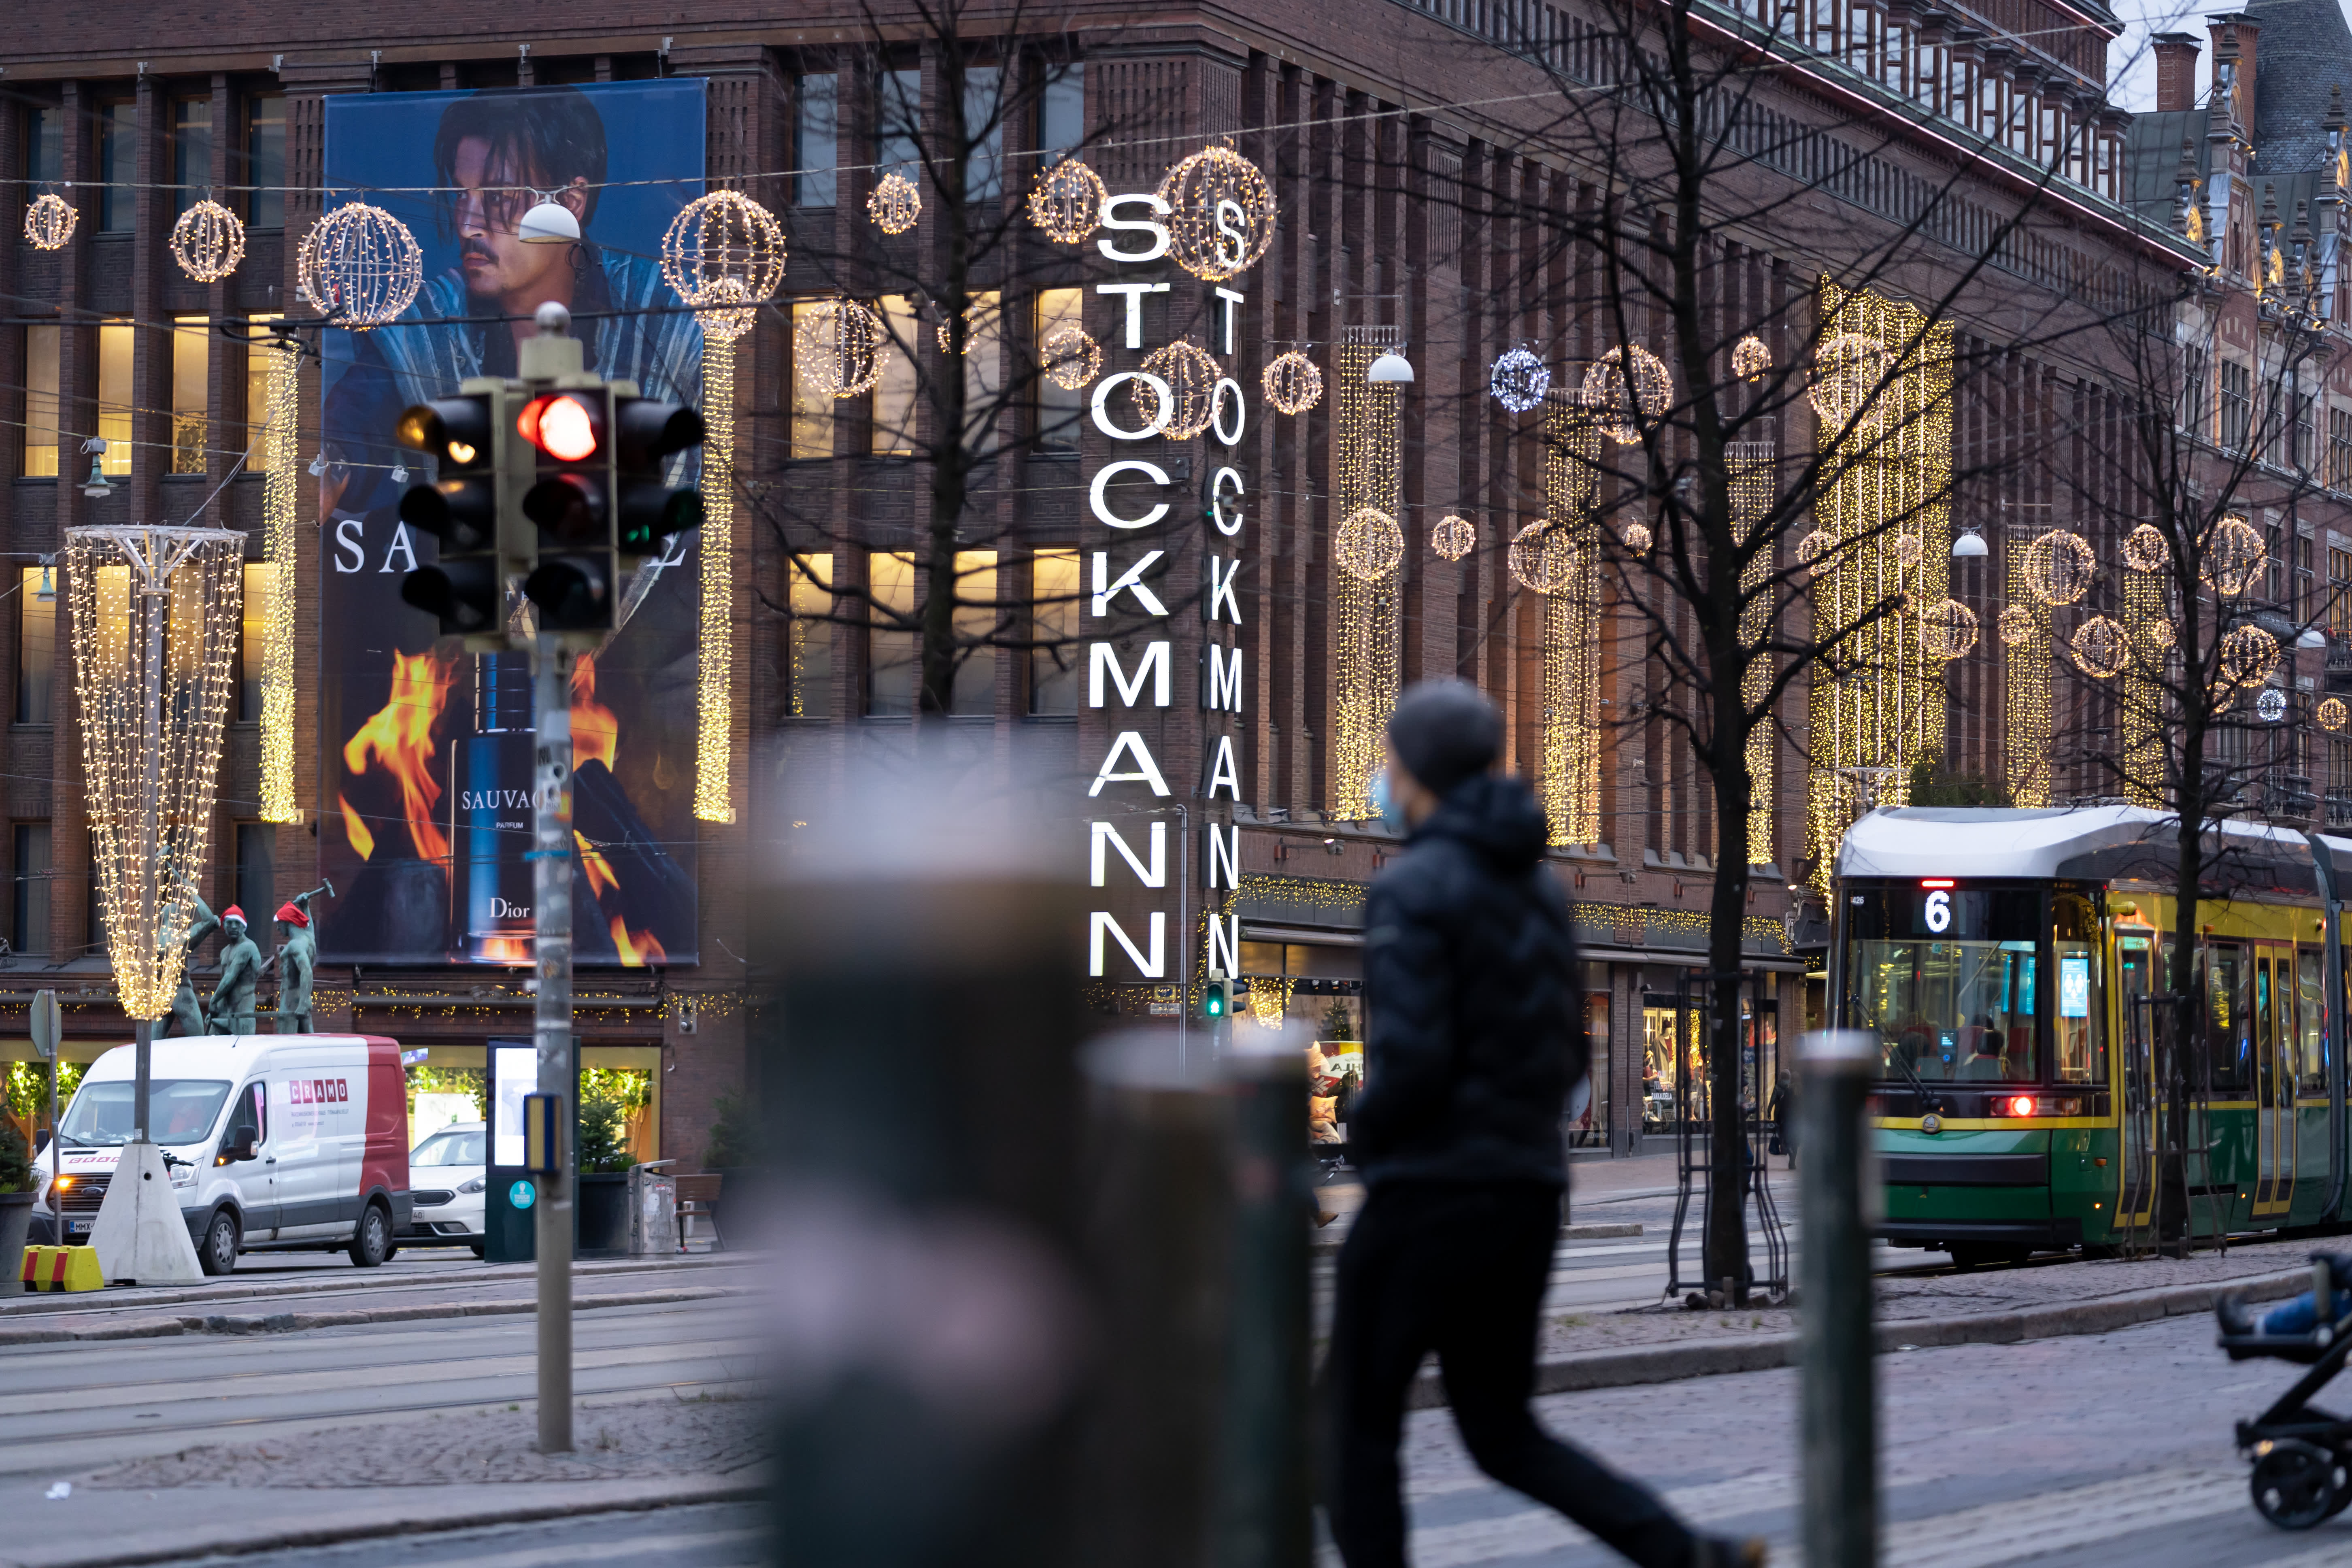 Stockmann can offer to all employees and close stores